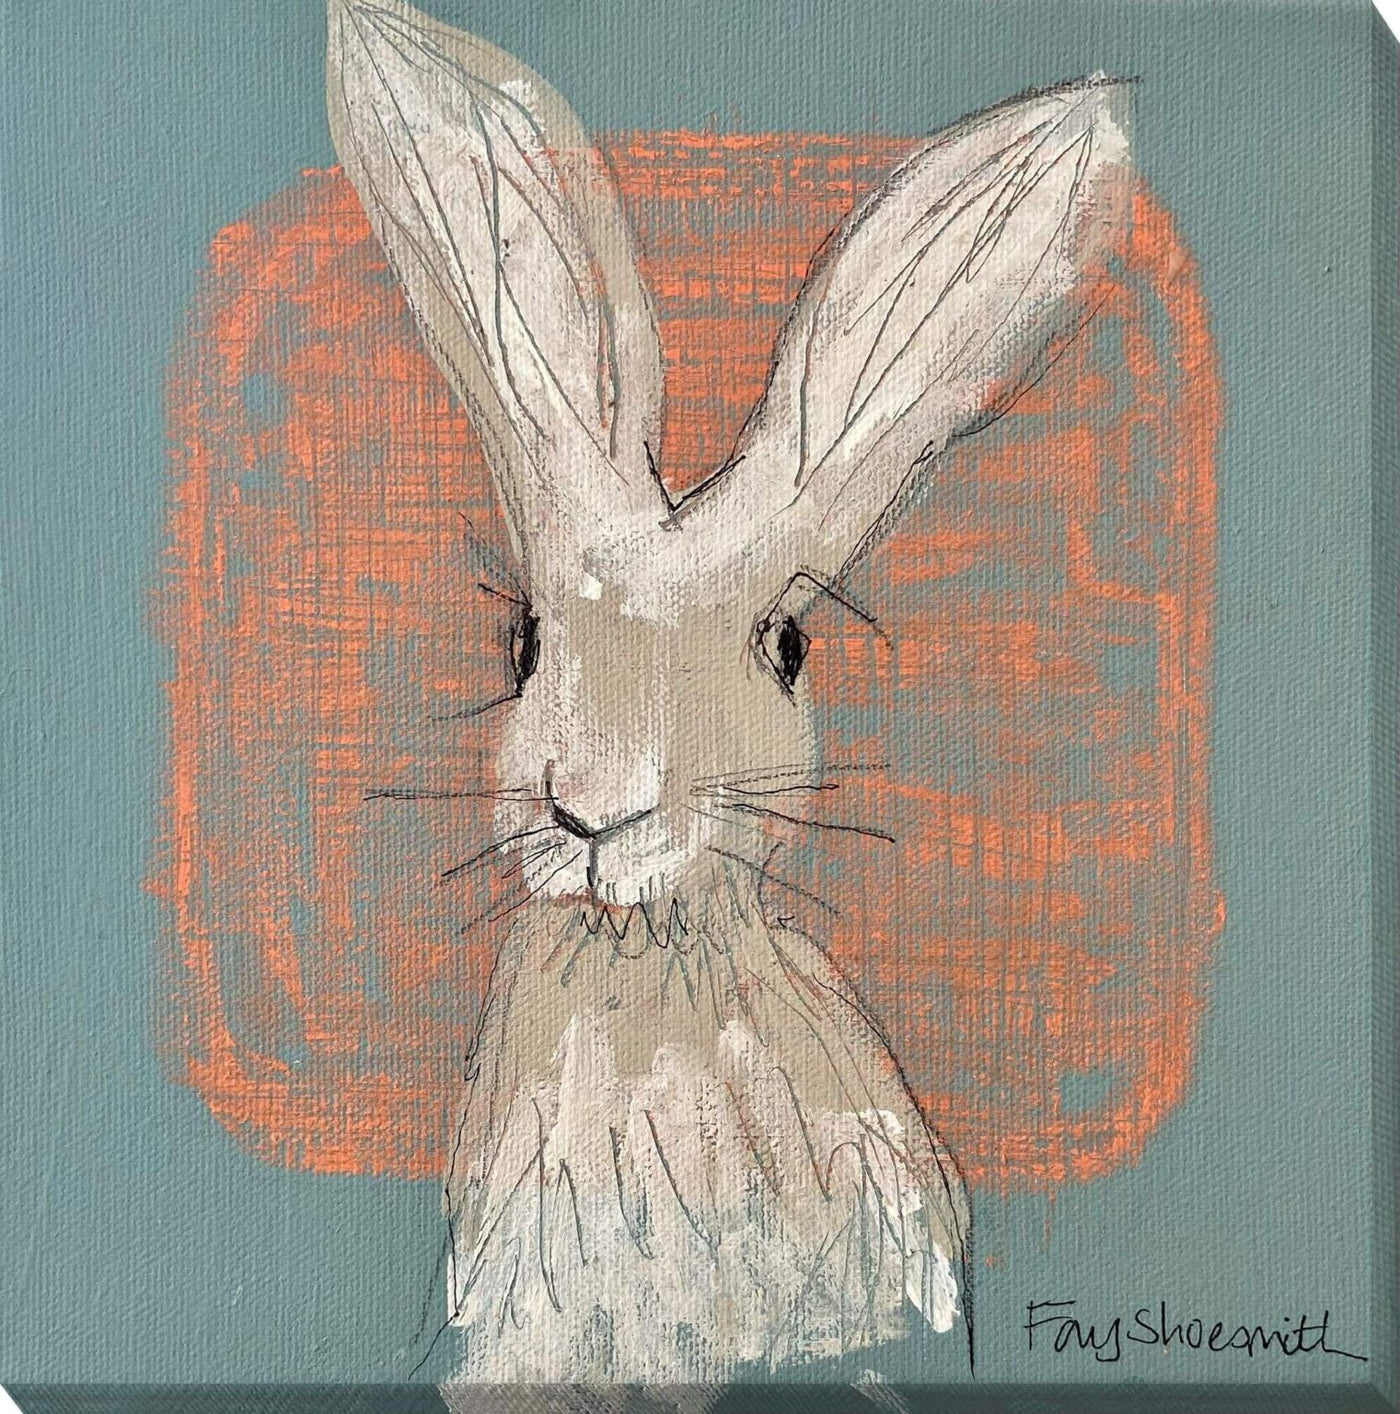 Coralie Hare By Fay Shoesmith - TheArtistsQuarter